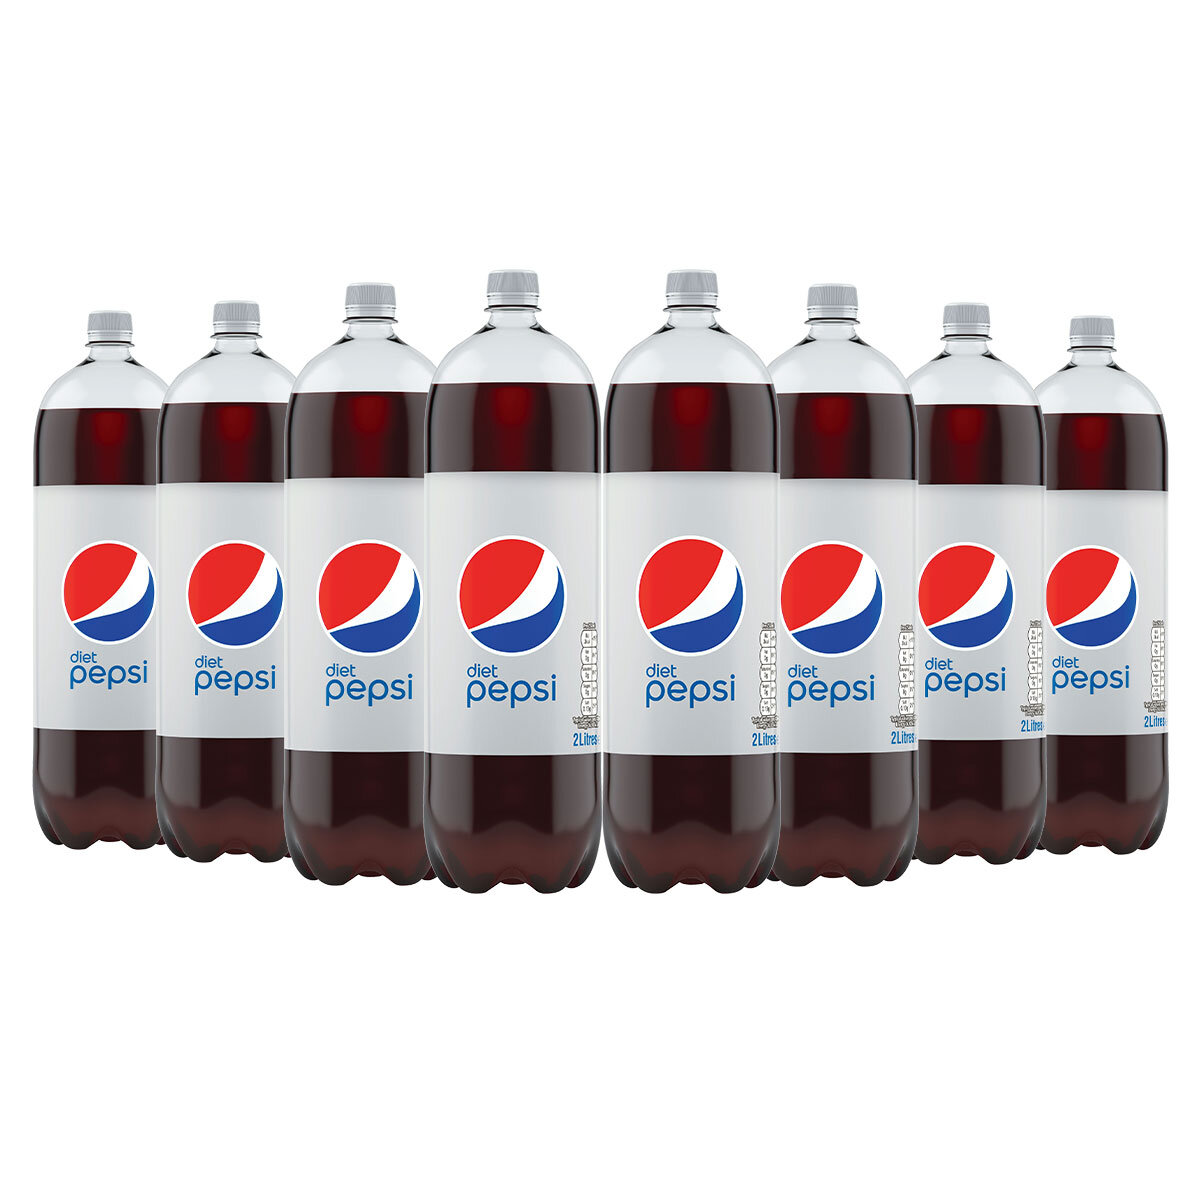 Cut out image of multiple bottles on white background